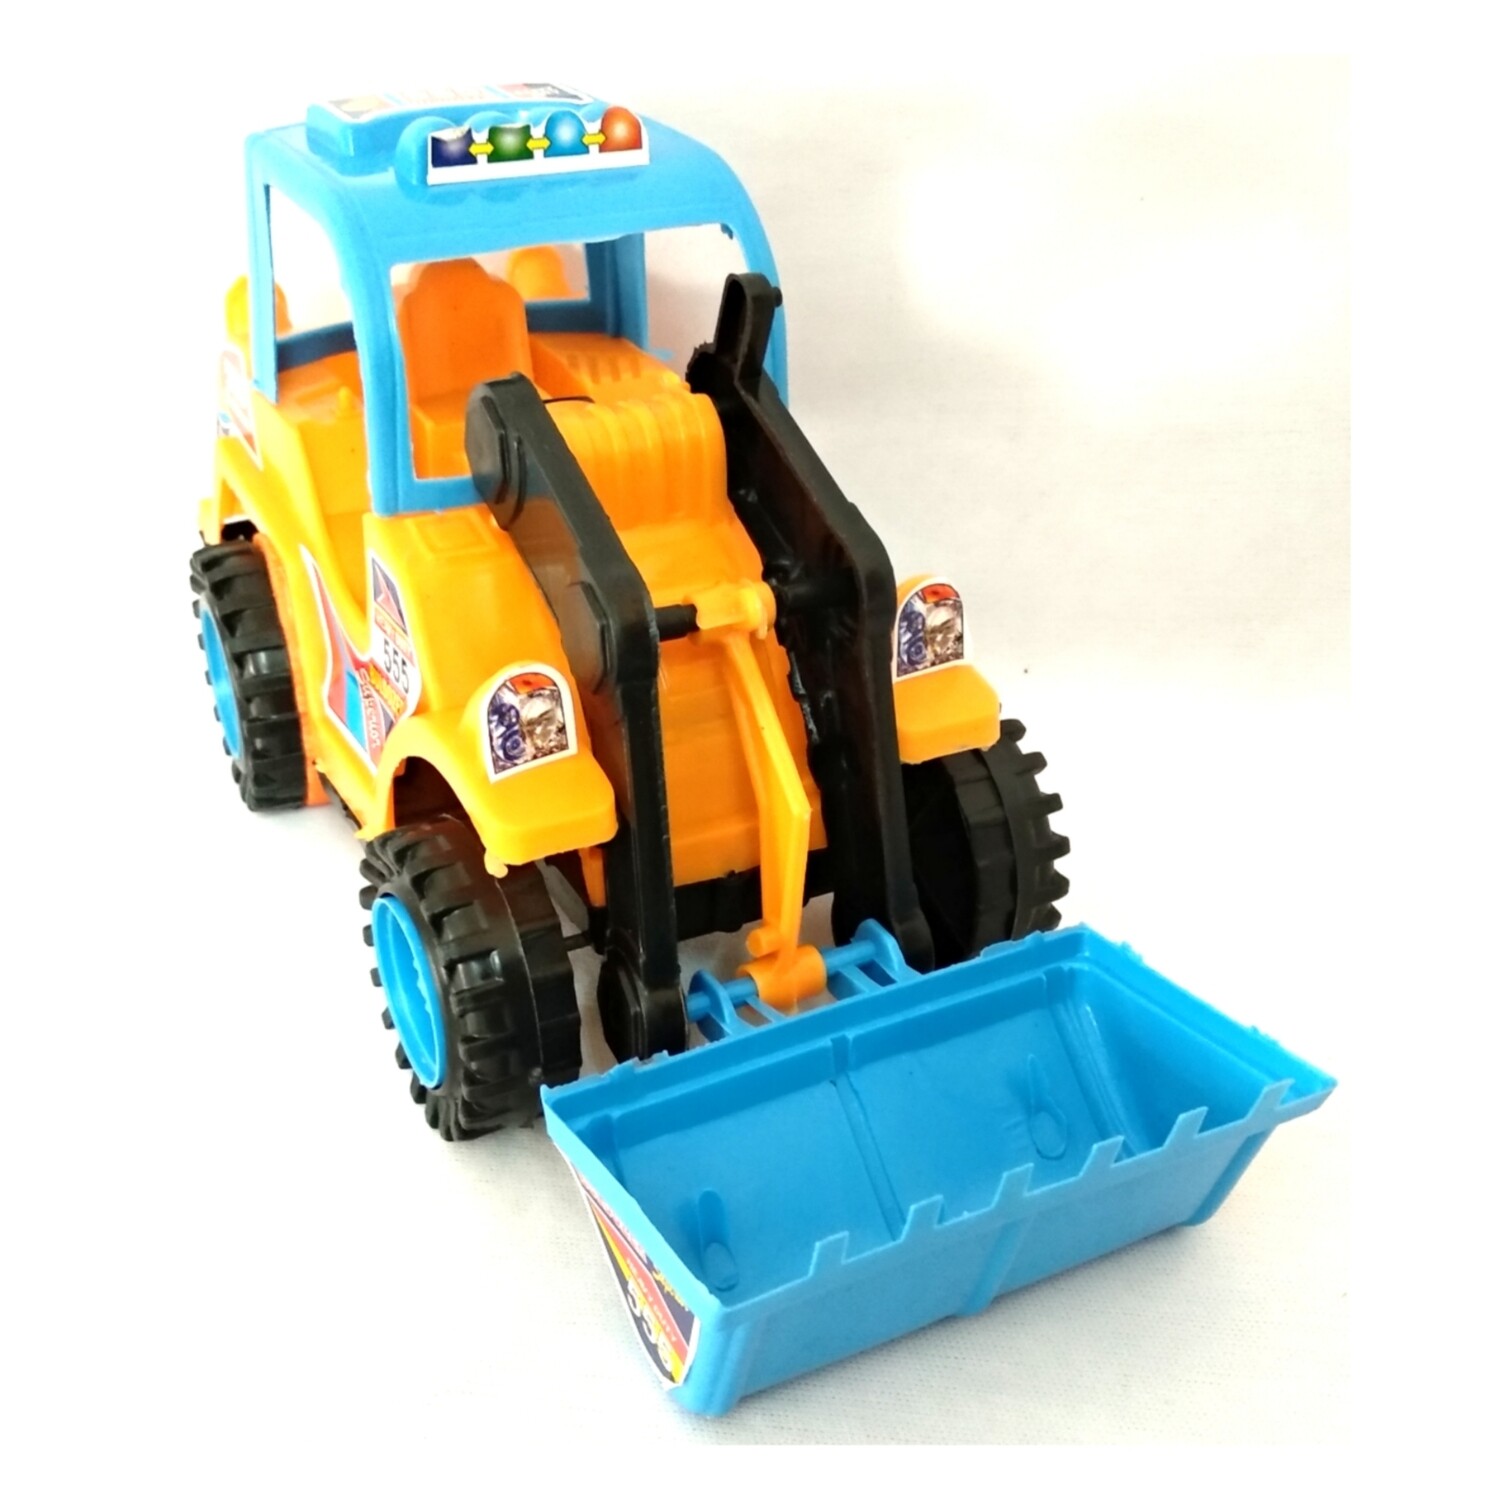 Heavy Duty 555 BullDozer Superior Friction Powered Toy For Kids - 3+ years (Colour May Vary)